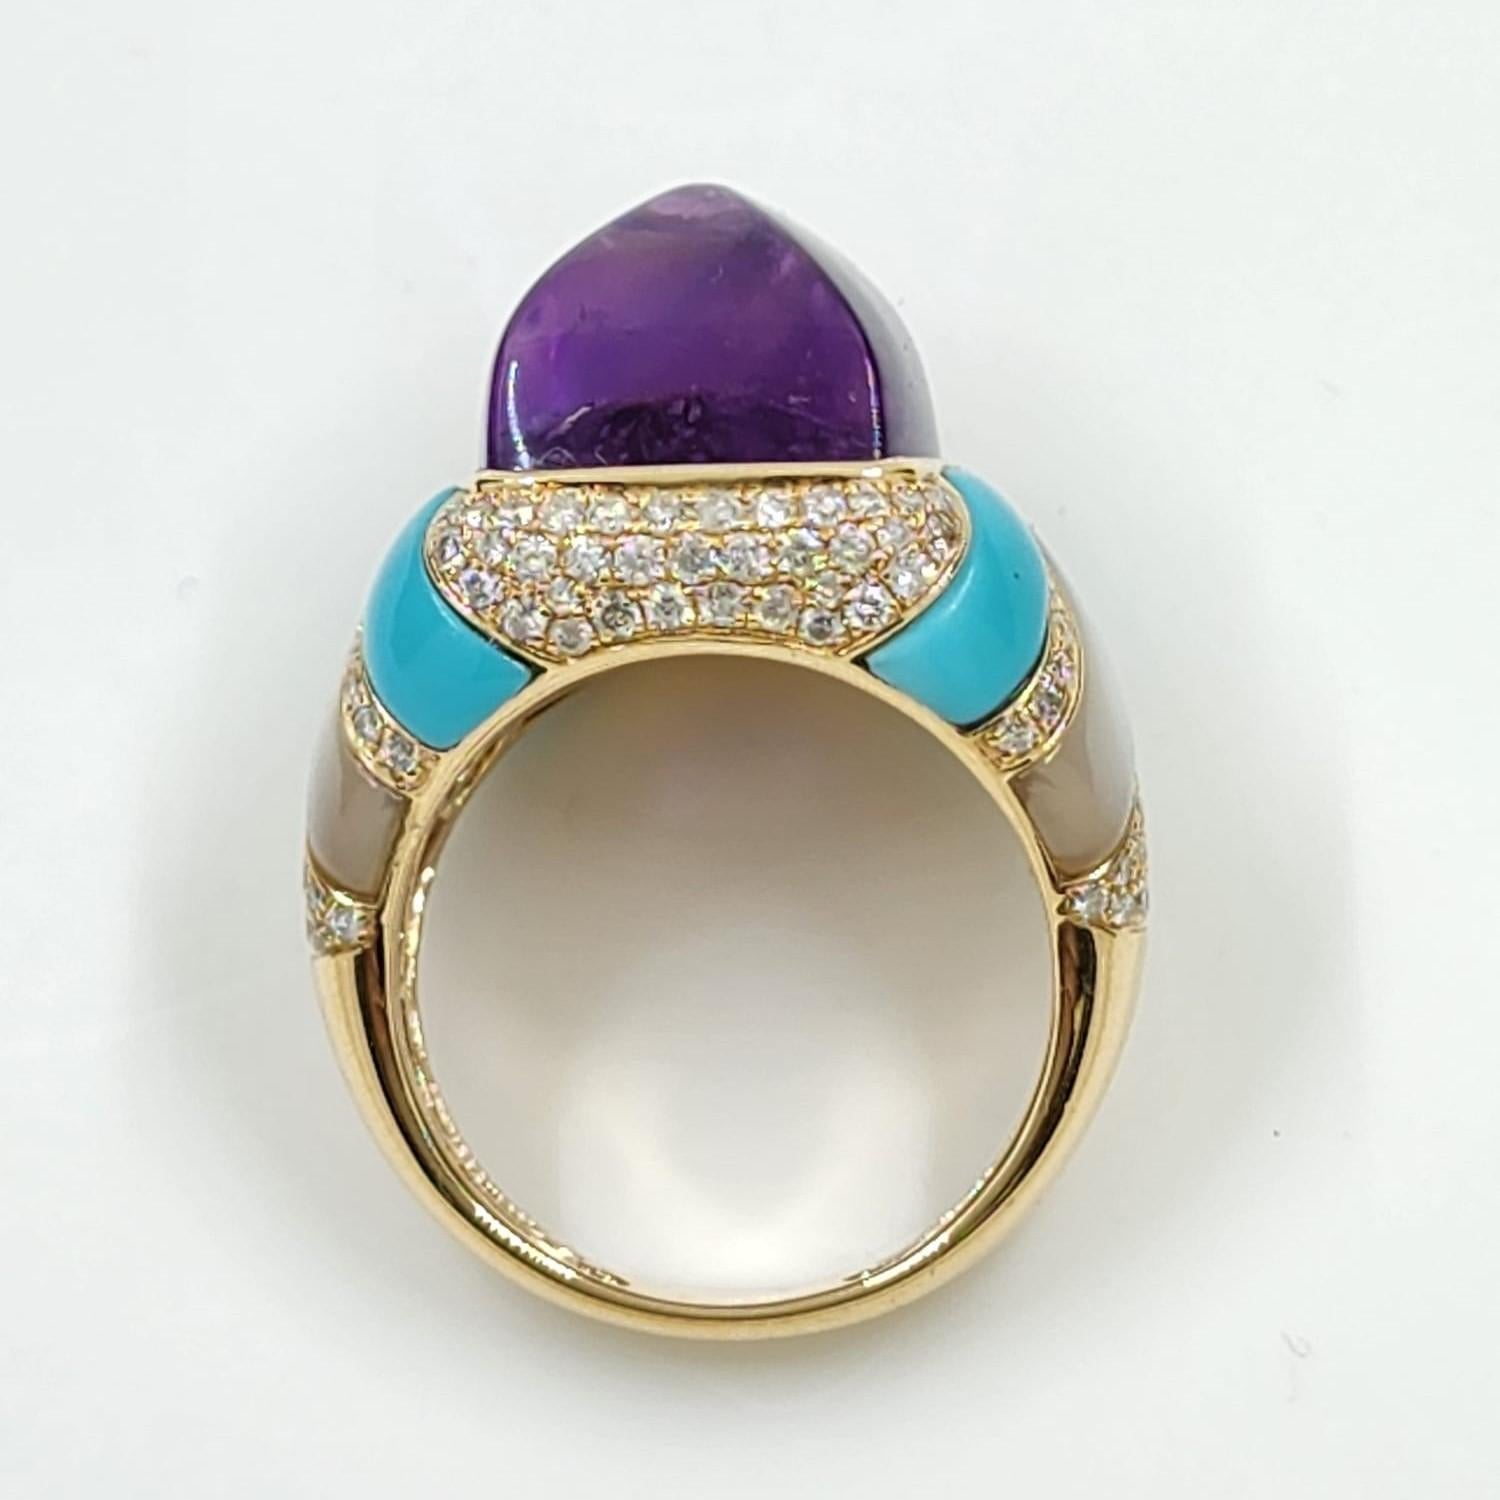 Contemporary 15.36 Carat Amethyst Diamond Turquoise Cocktail Ring in 14 Karat Yellow Gold For Sale